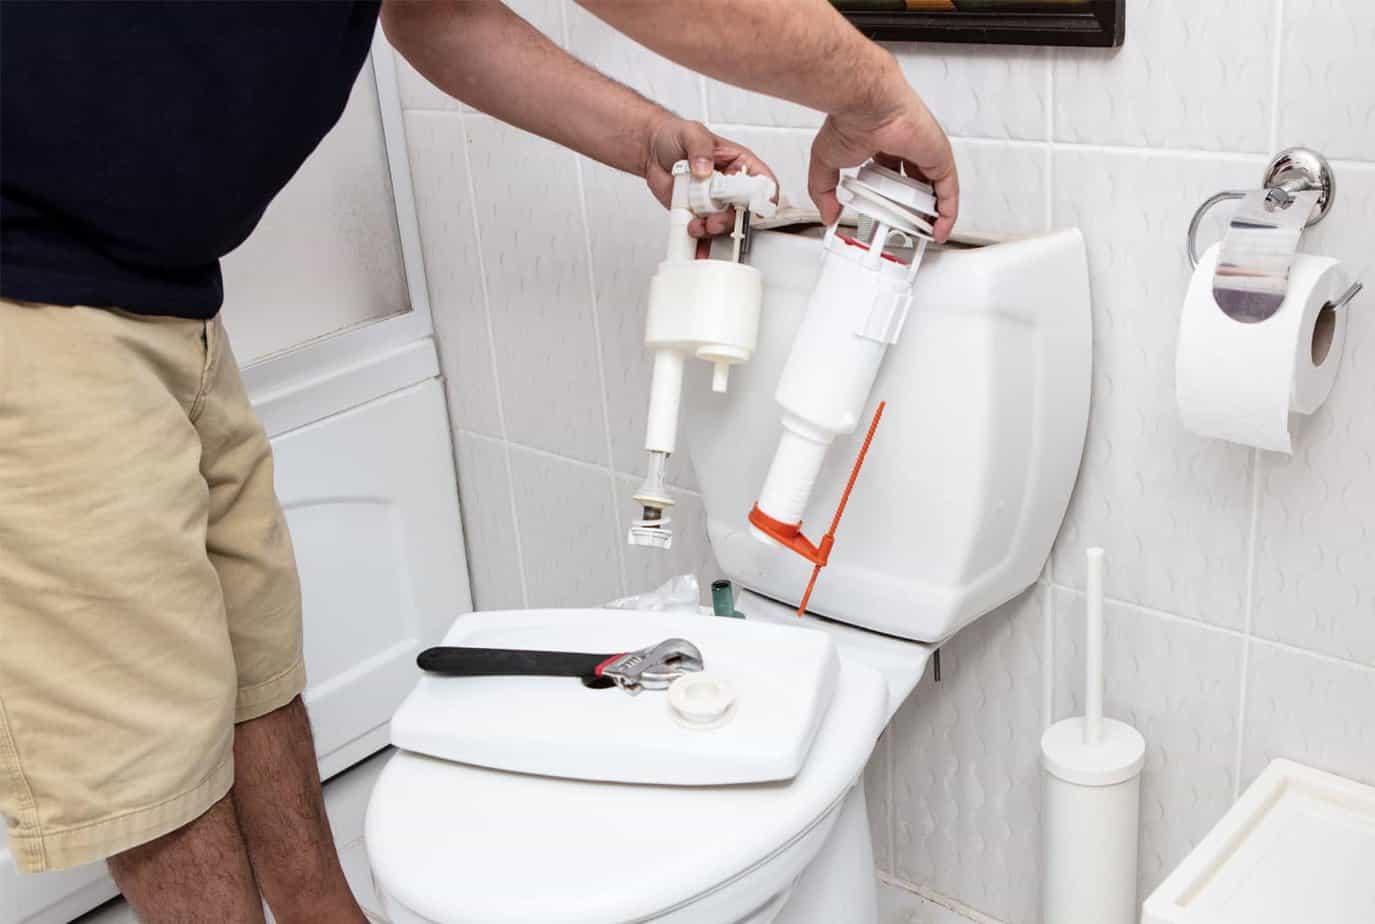 Toilet Not Filling Up? Guide On How To Change A Toilet Fill Valve